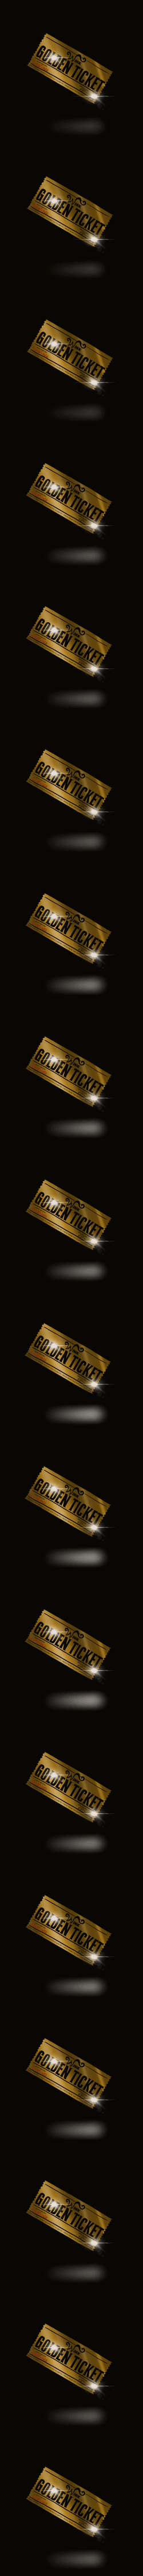 THE GOLDEN TICKET COLLECTIBLES collection image